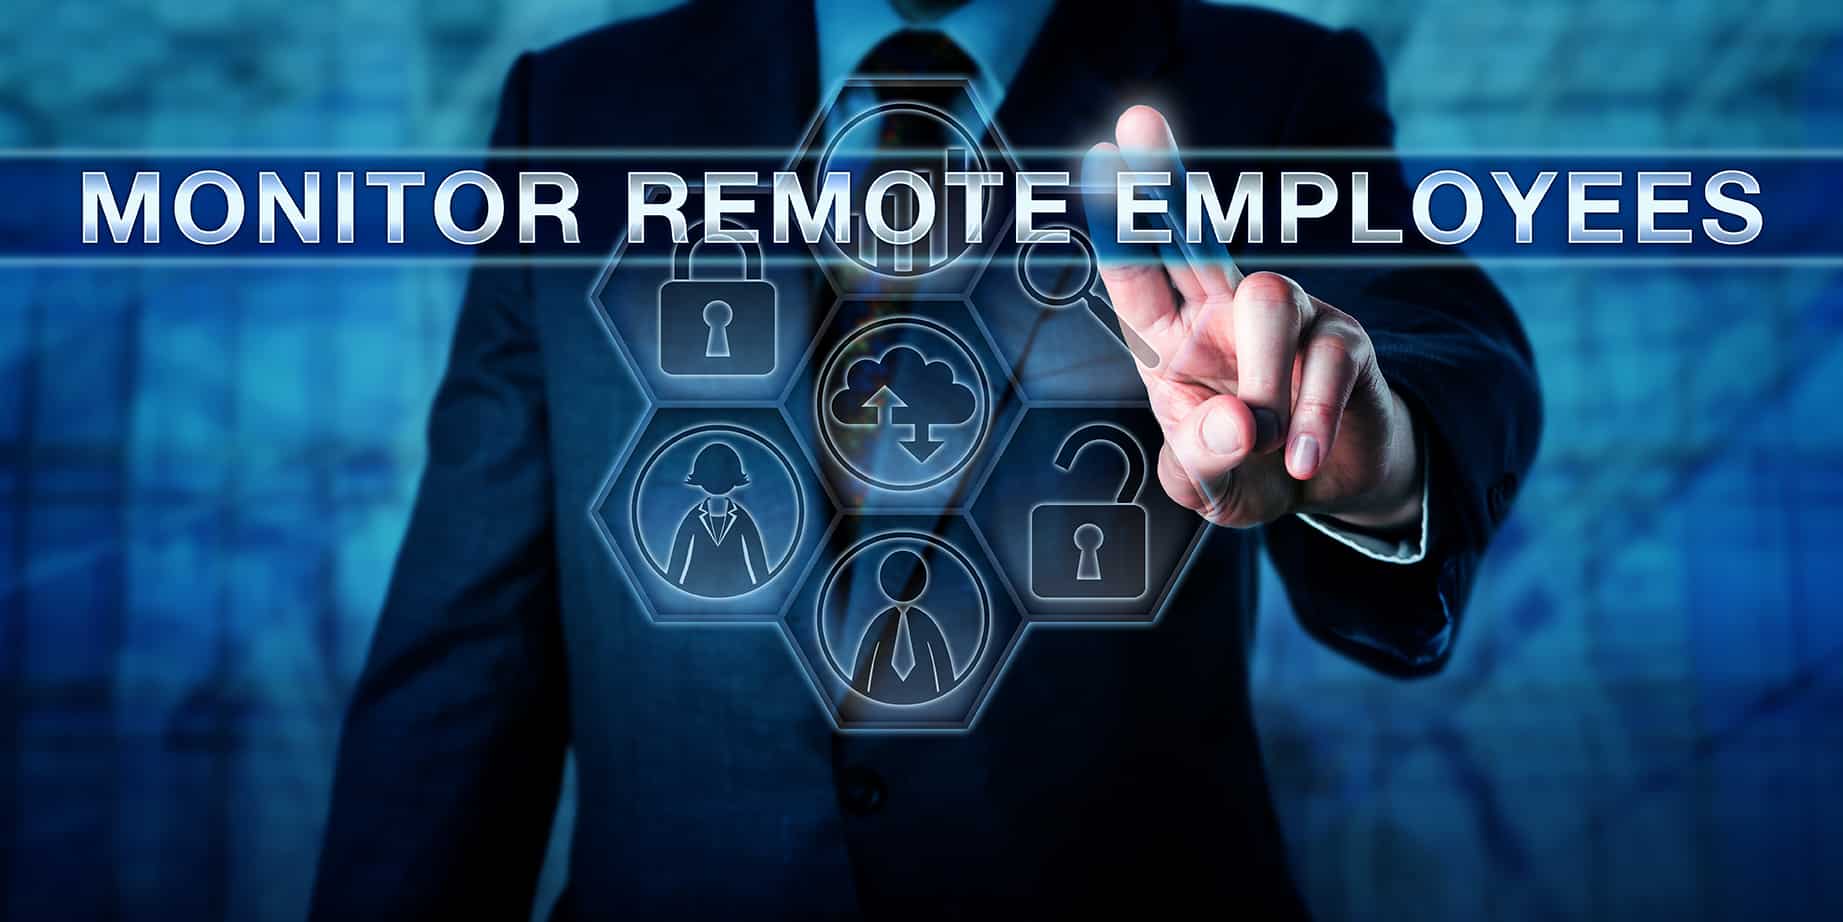 Can your network handle an increase in remote workers?